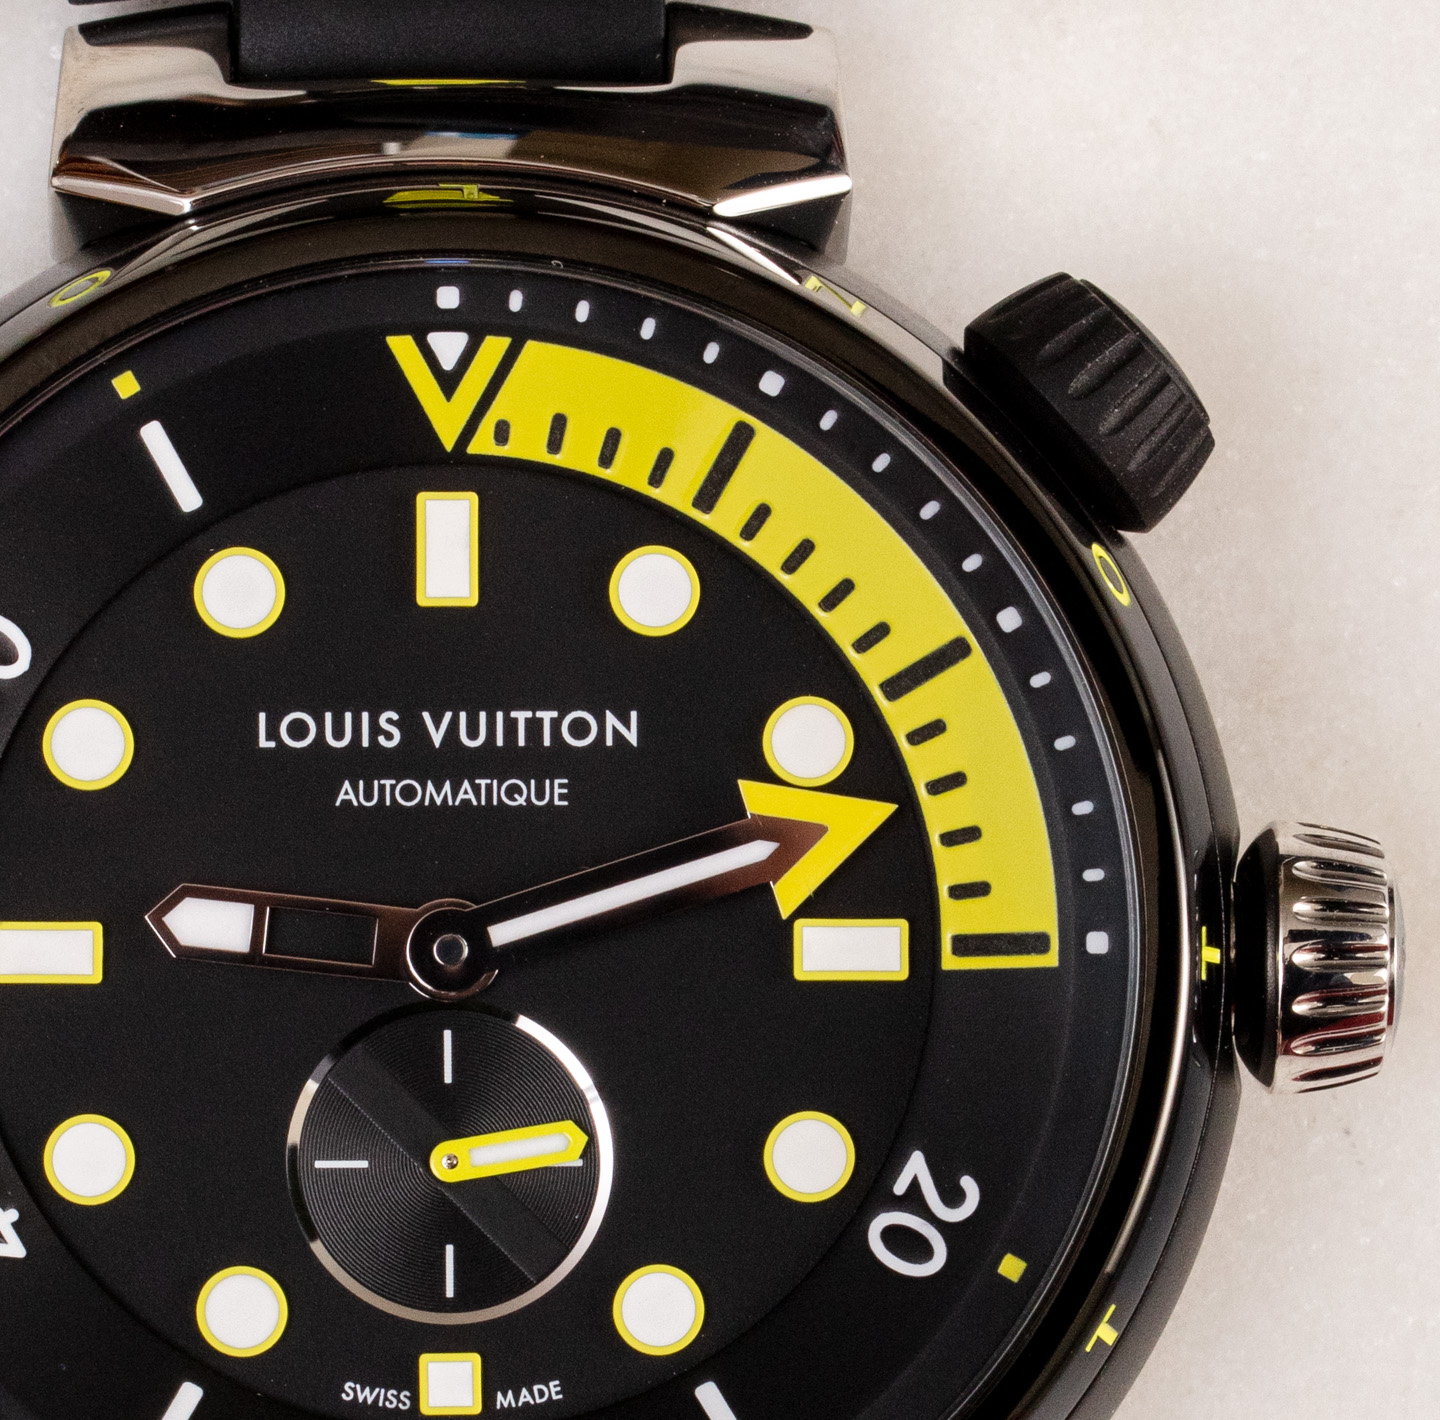 Louis Vuitton Presents Tambour Street Diver Chronograph 2023Louis Vuitton  Presents Tambour Street Diver Chronograph 2023 - Luxury Watch Trends 2018 -  Baselworld SIHH Watch News